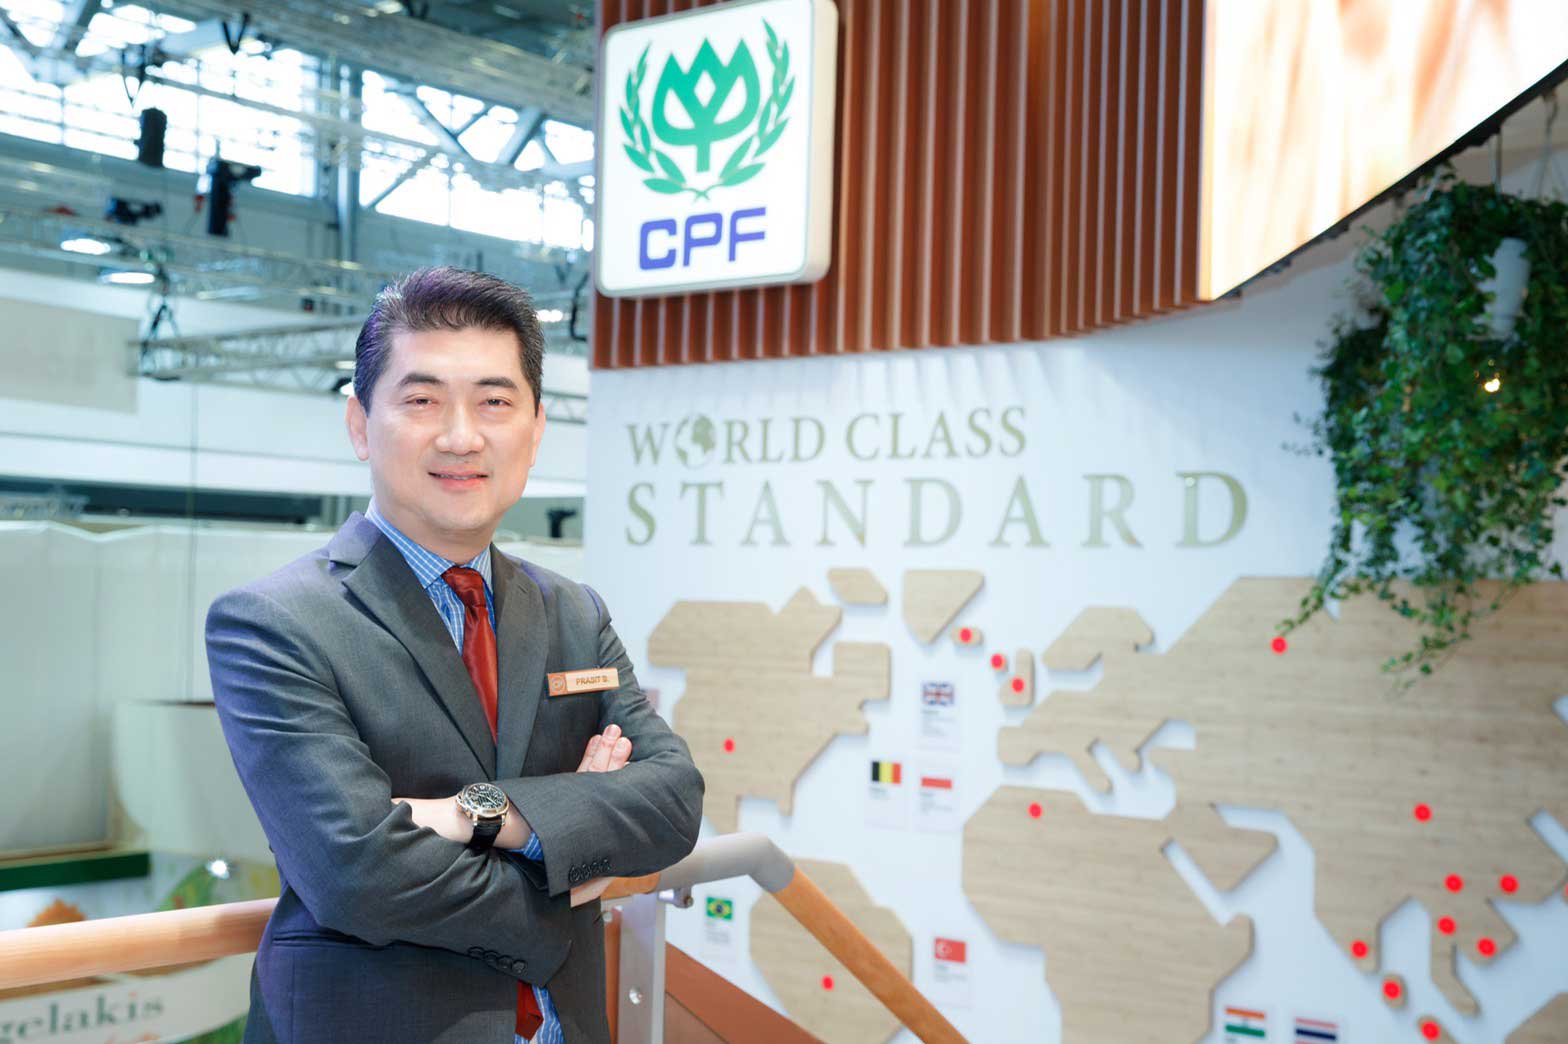 CPF’s first-half earnings jump 45% to Baht12,139 million  Interim dividend set at Baht0.40 per share  Second-half earnings expected to remain robust